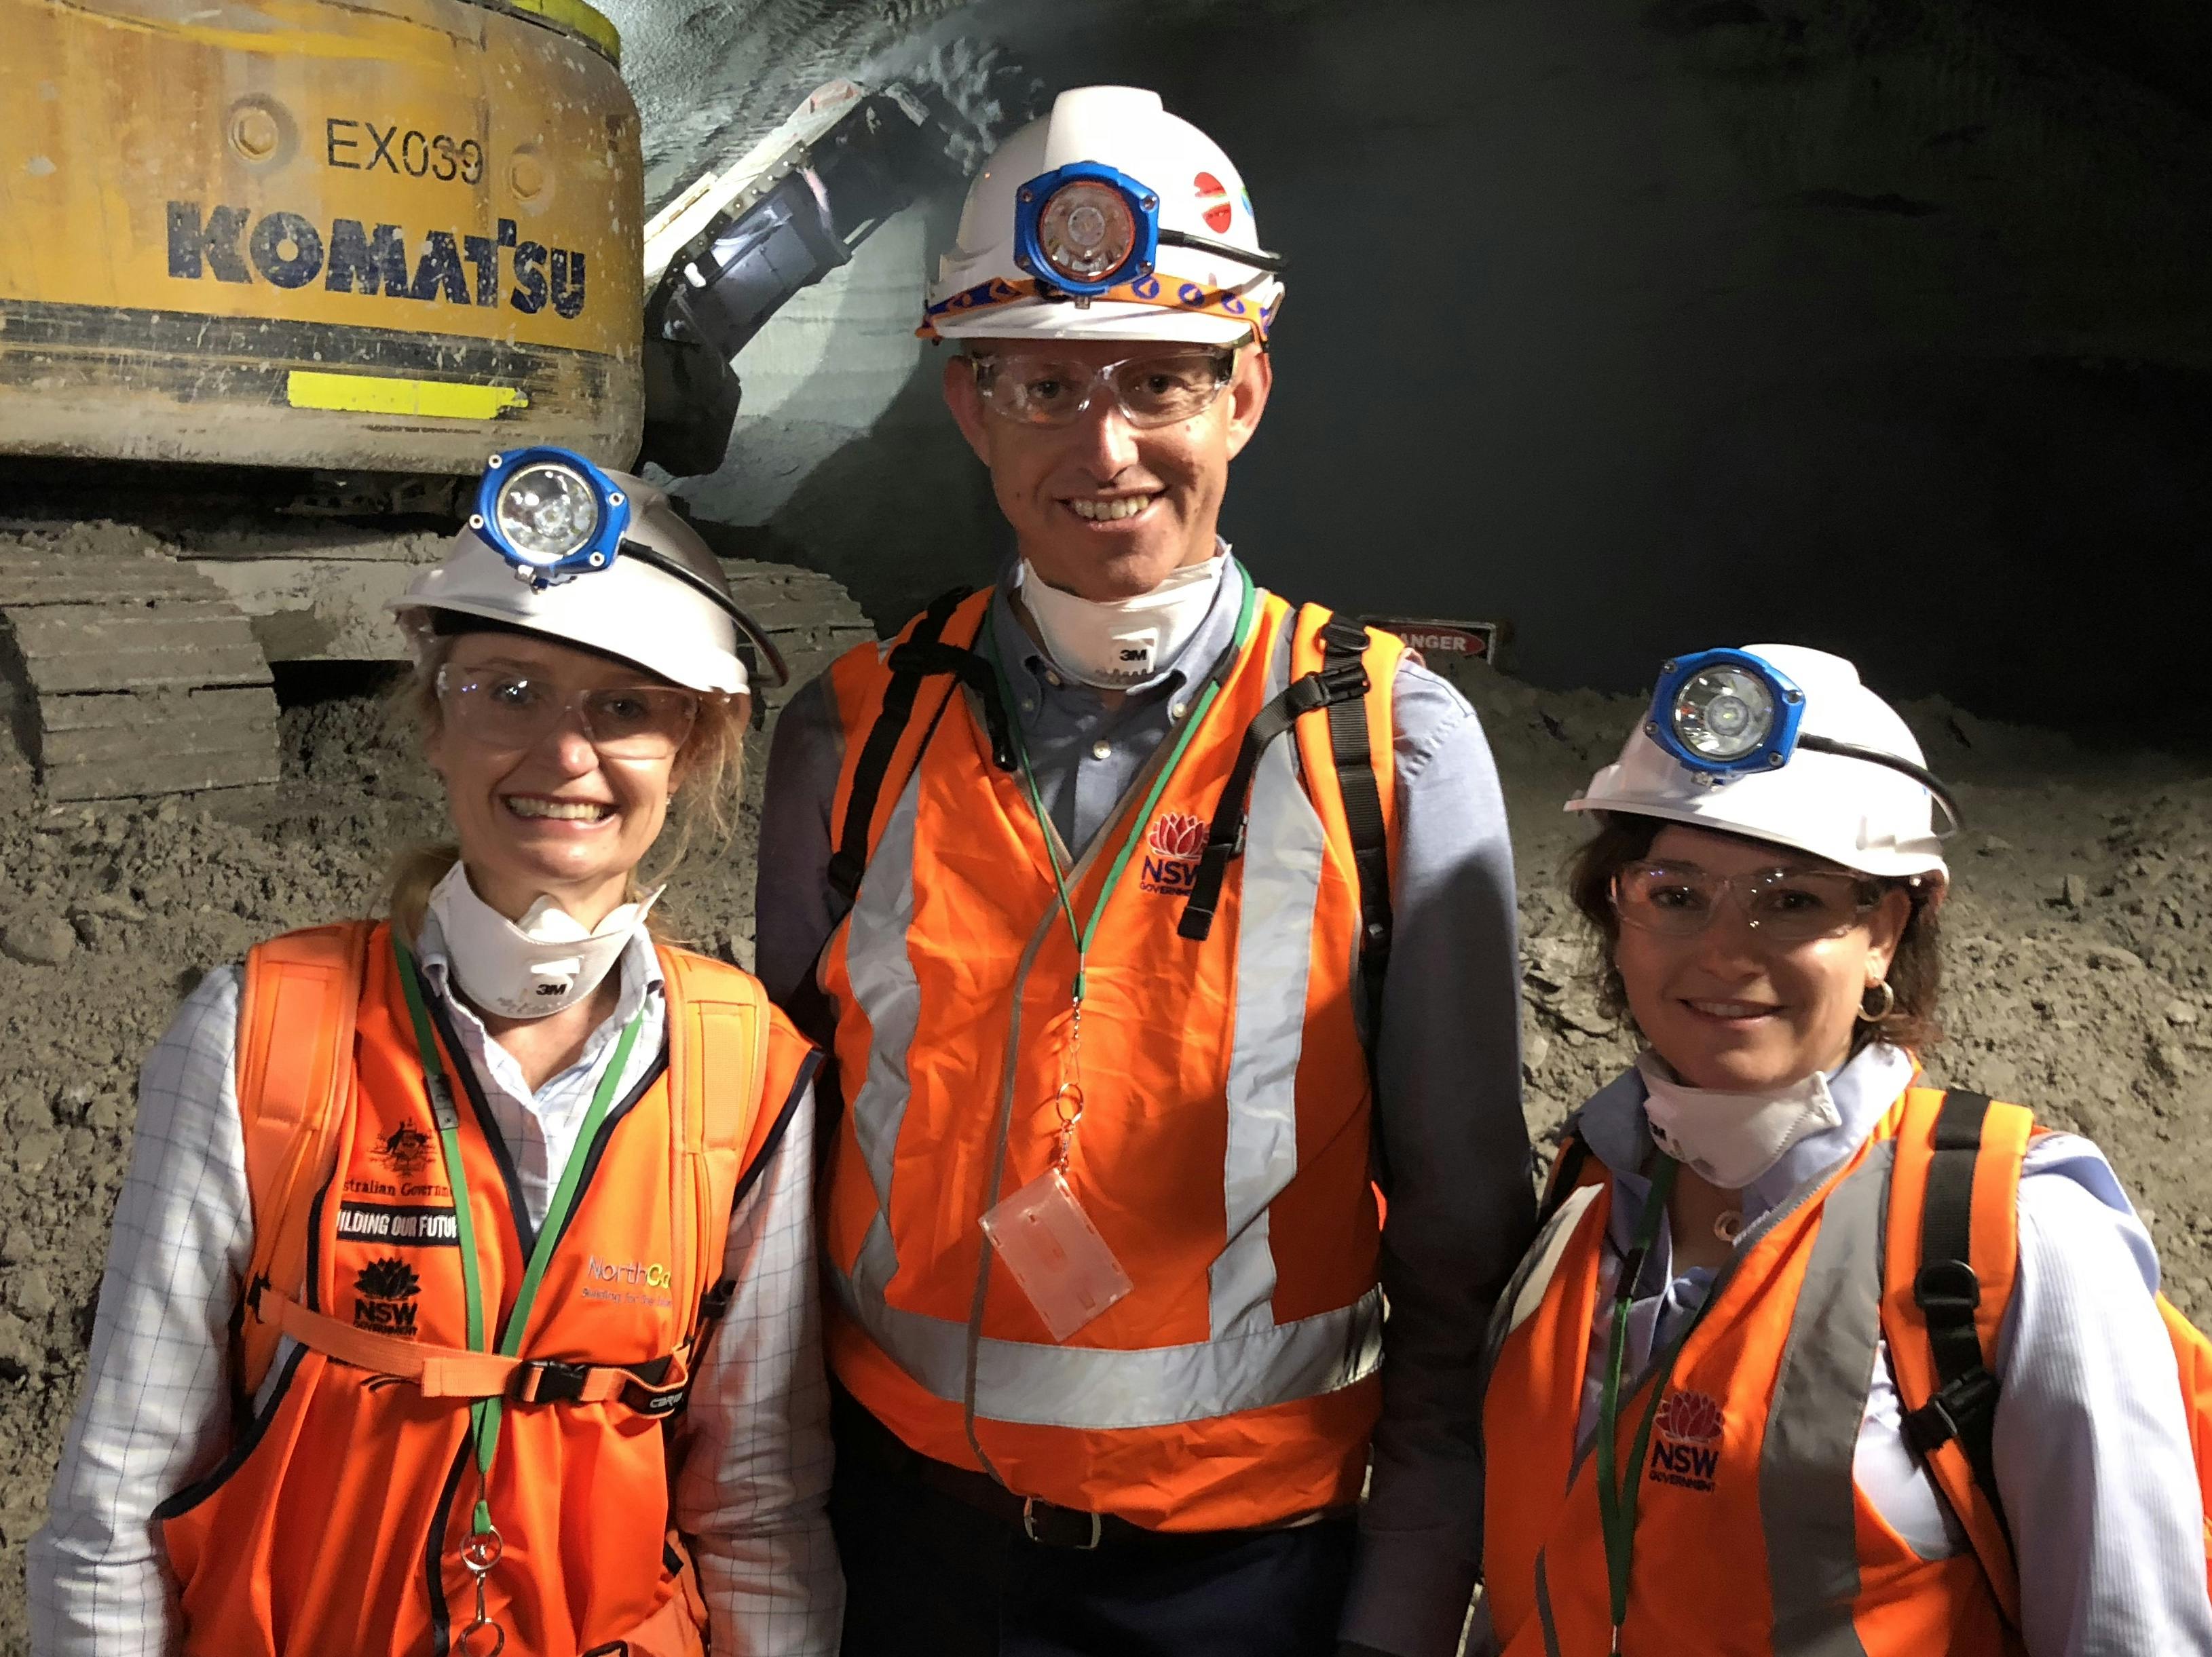 Underground Visiting One Of The North Connex Sites With Camilla And Sonja